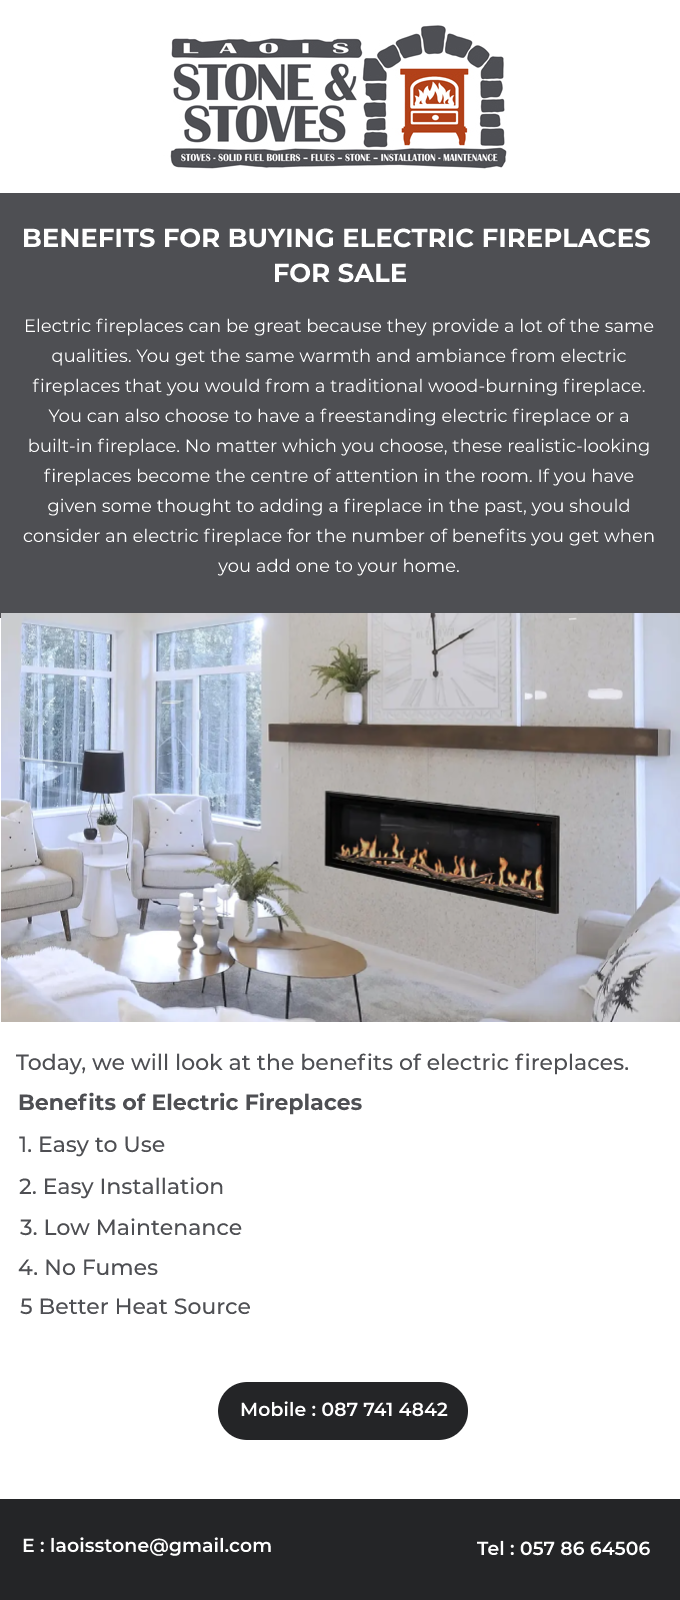 Benefits for Buying Electric Fireplaces for Sale